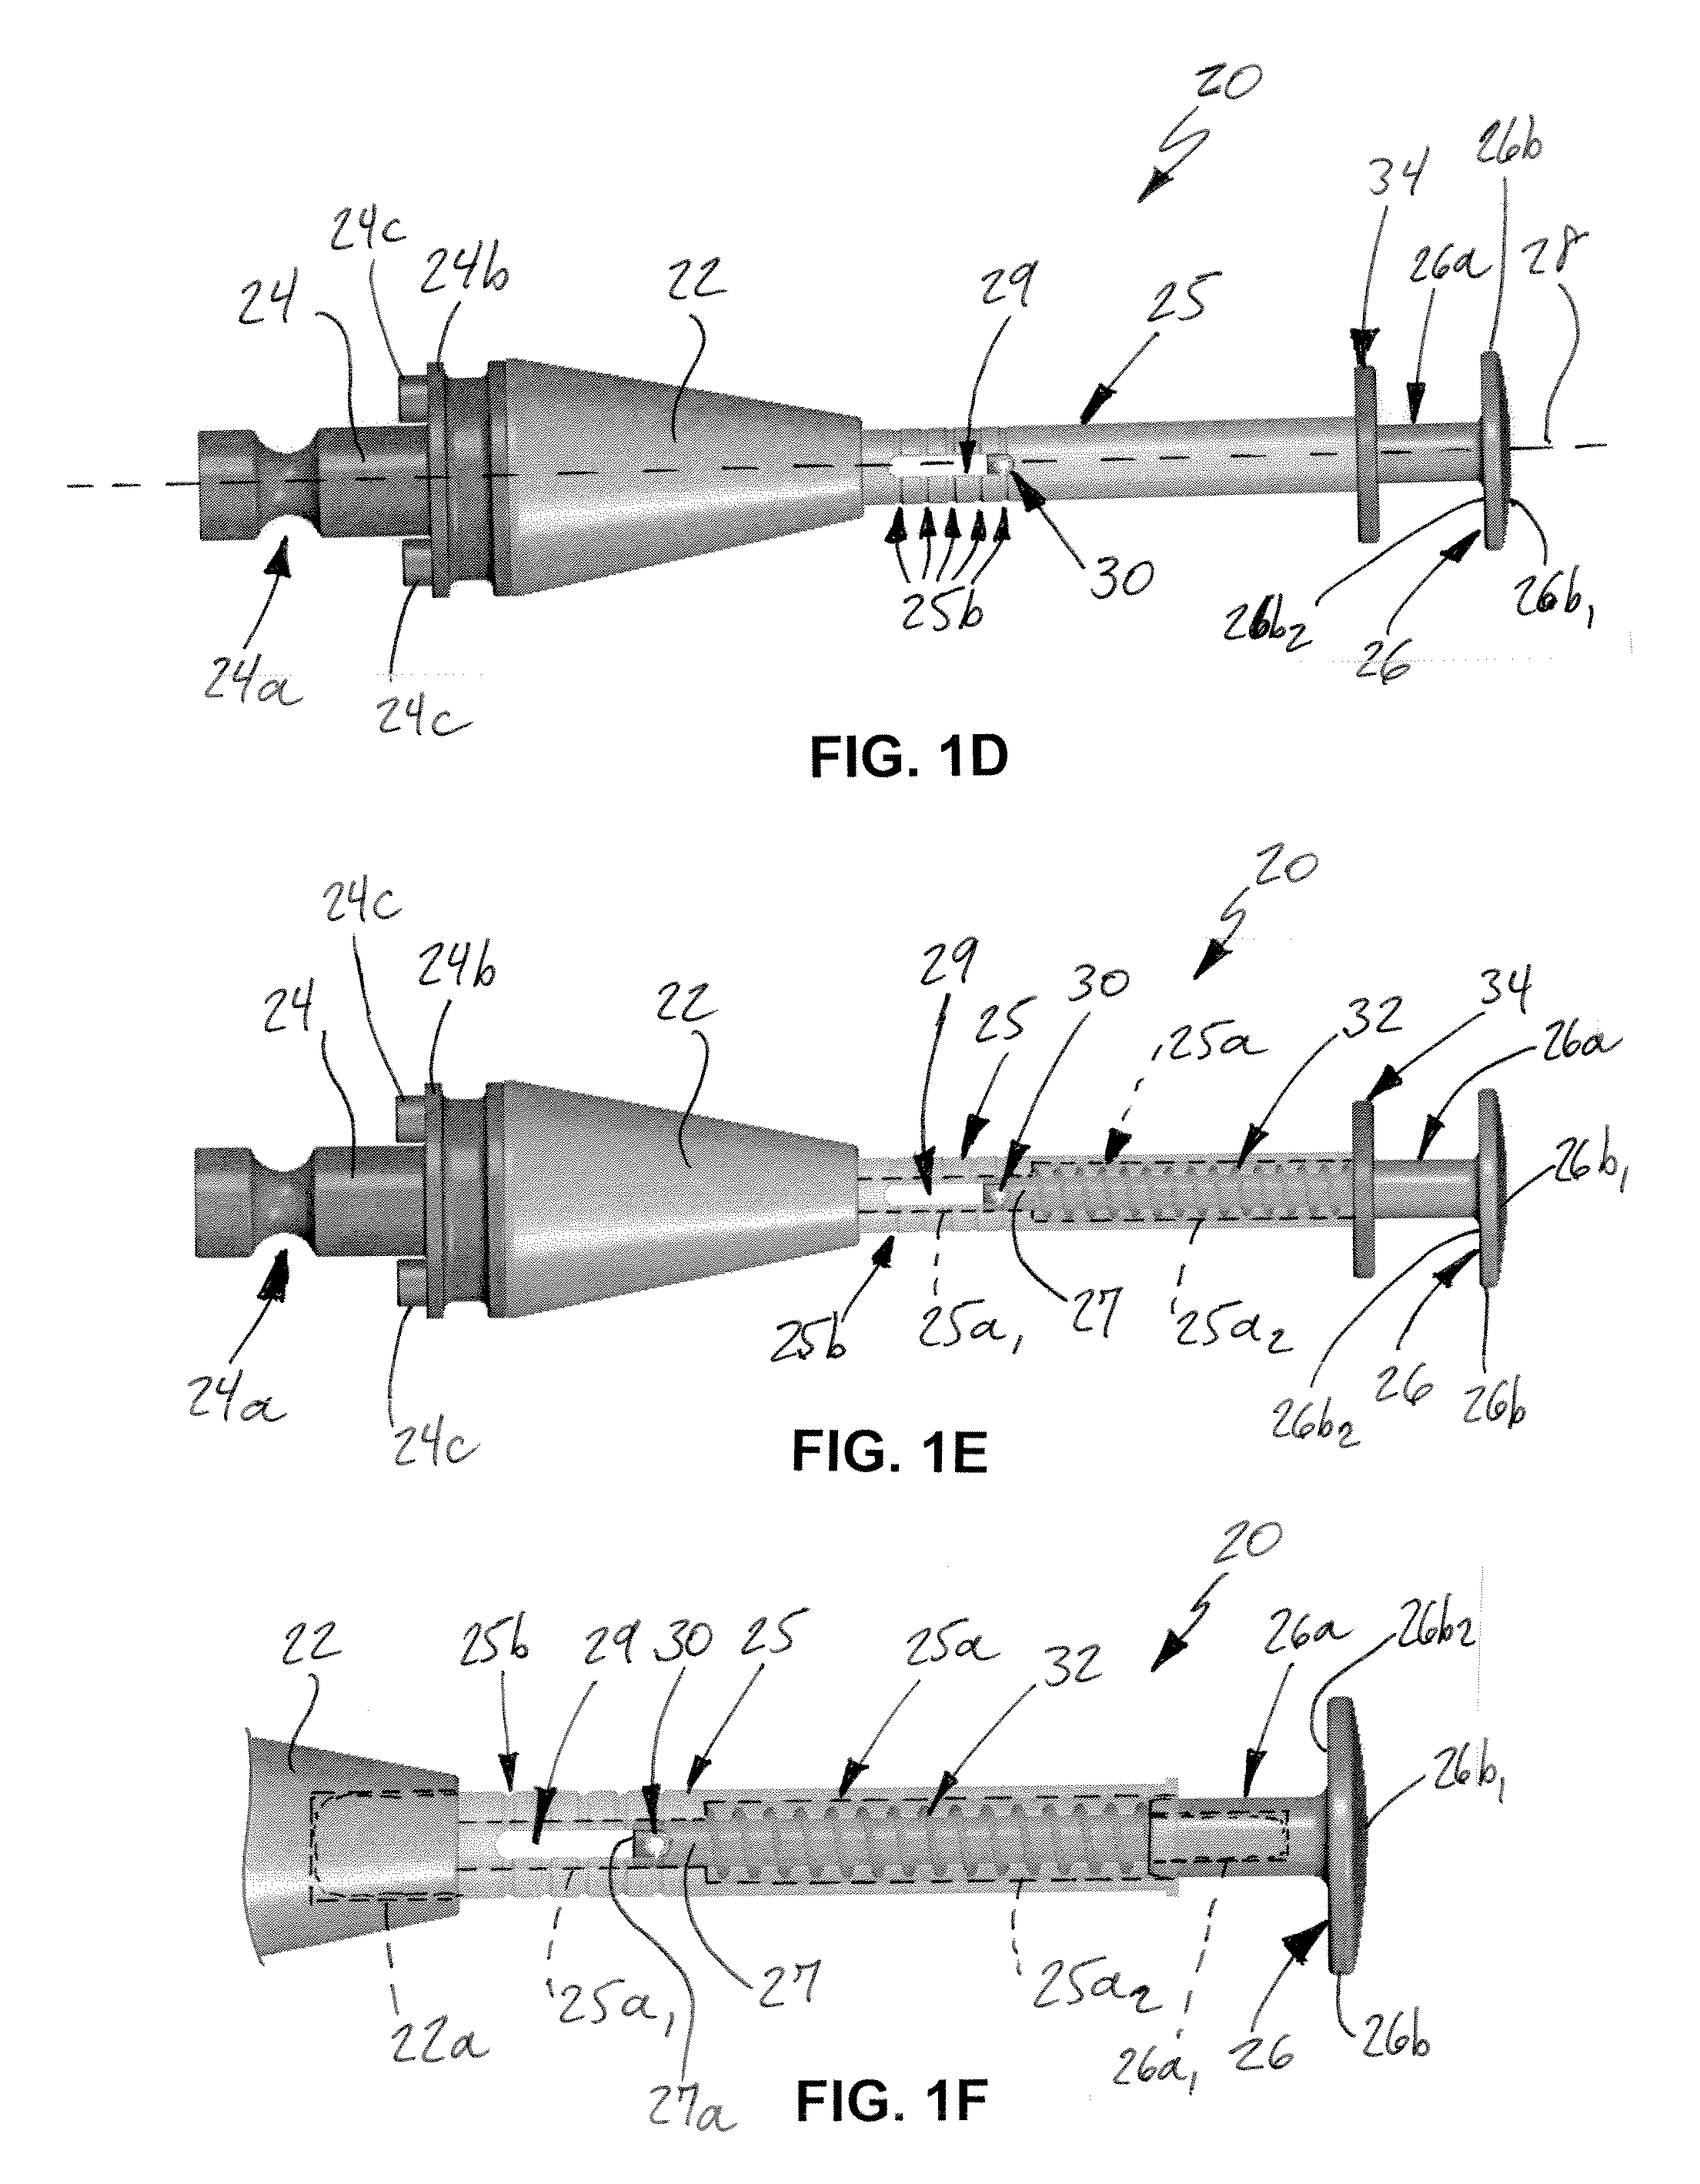 Device and Method for Vascular Tamponade Following Percutaneous Puncture